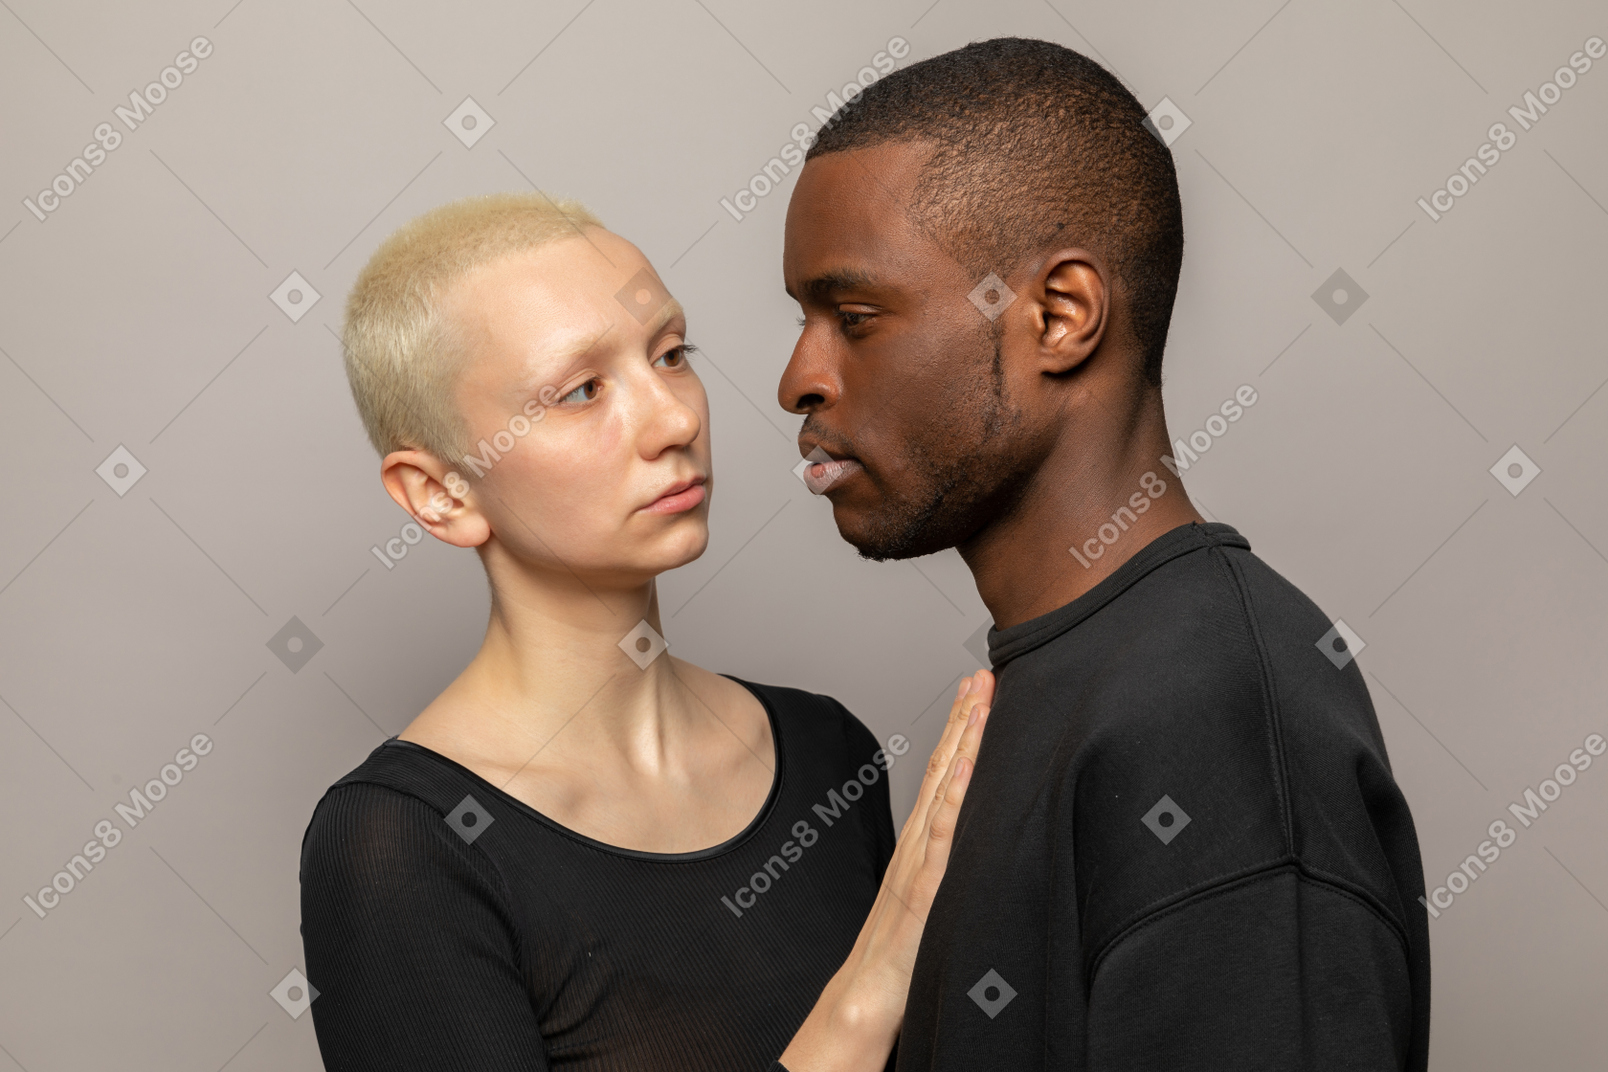 Young woman put her hand on man's chest